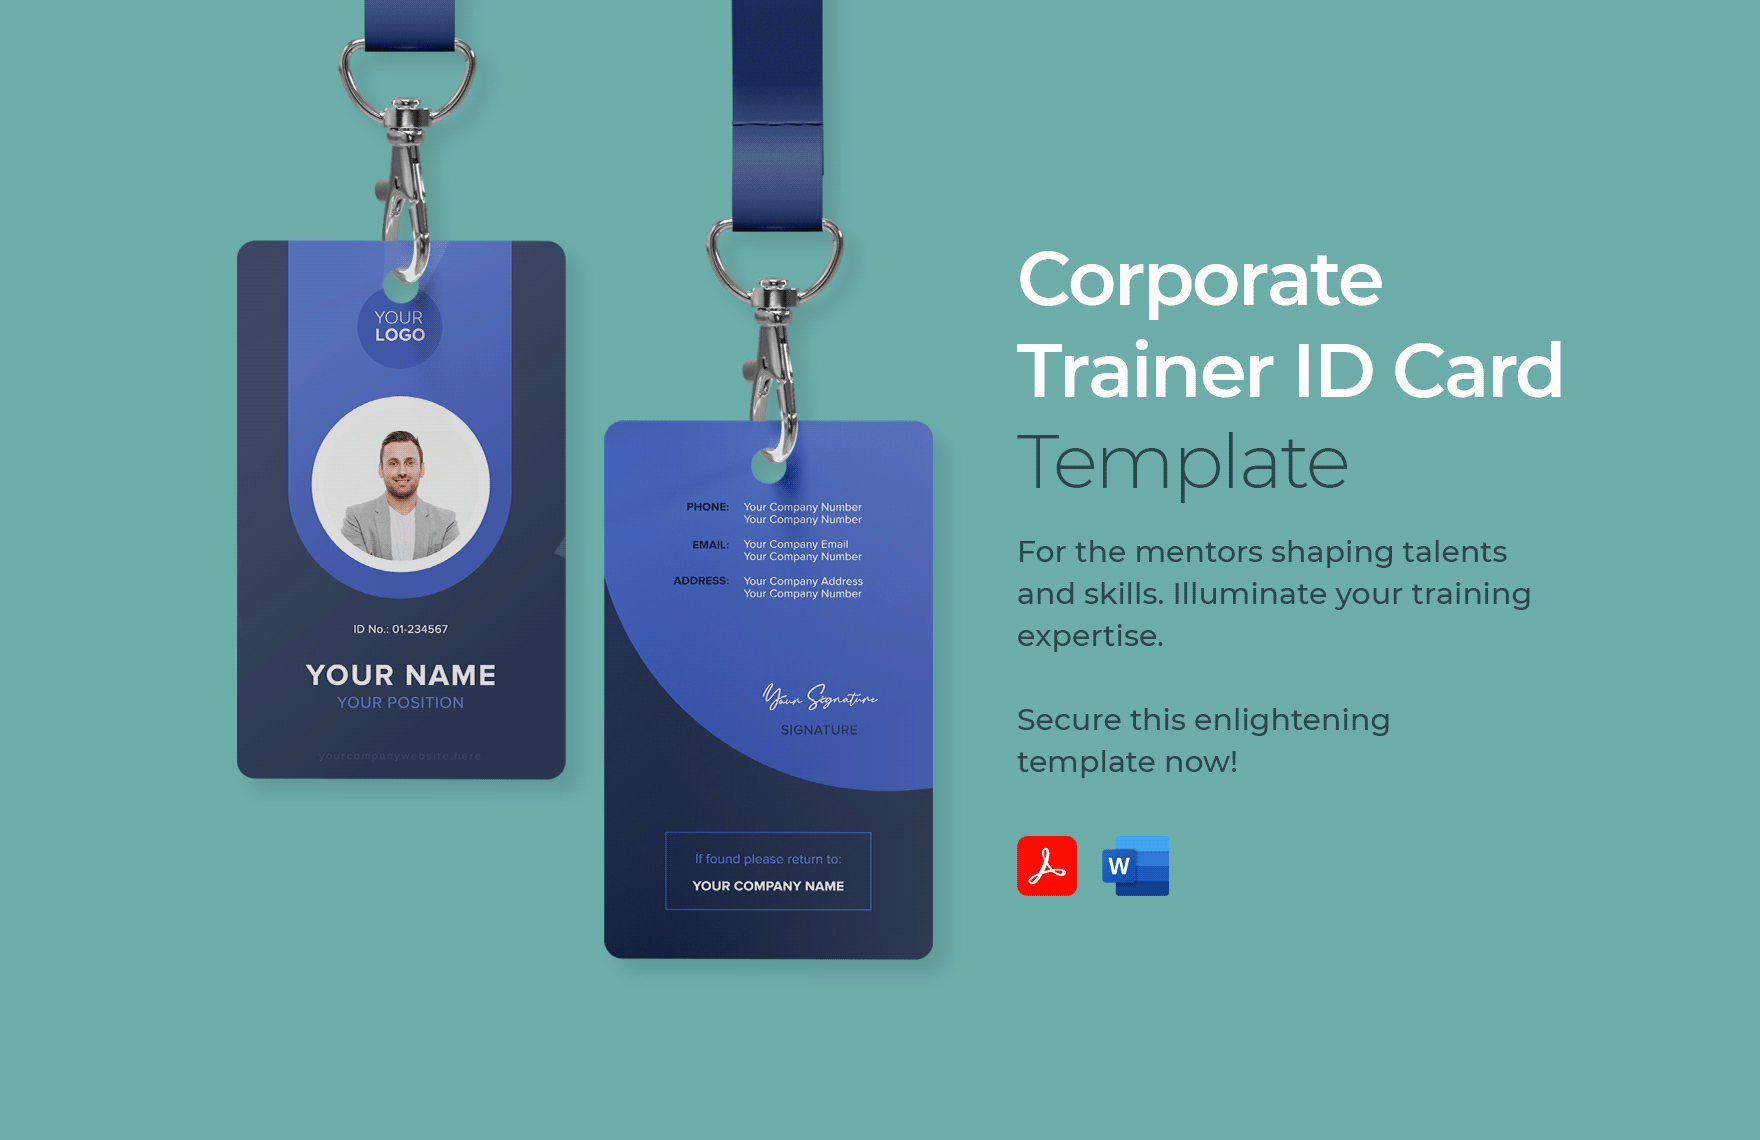 Corporate Trainer ID Card Template